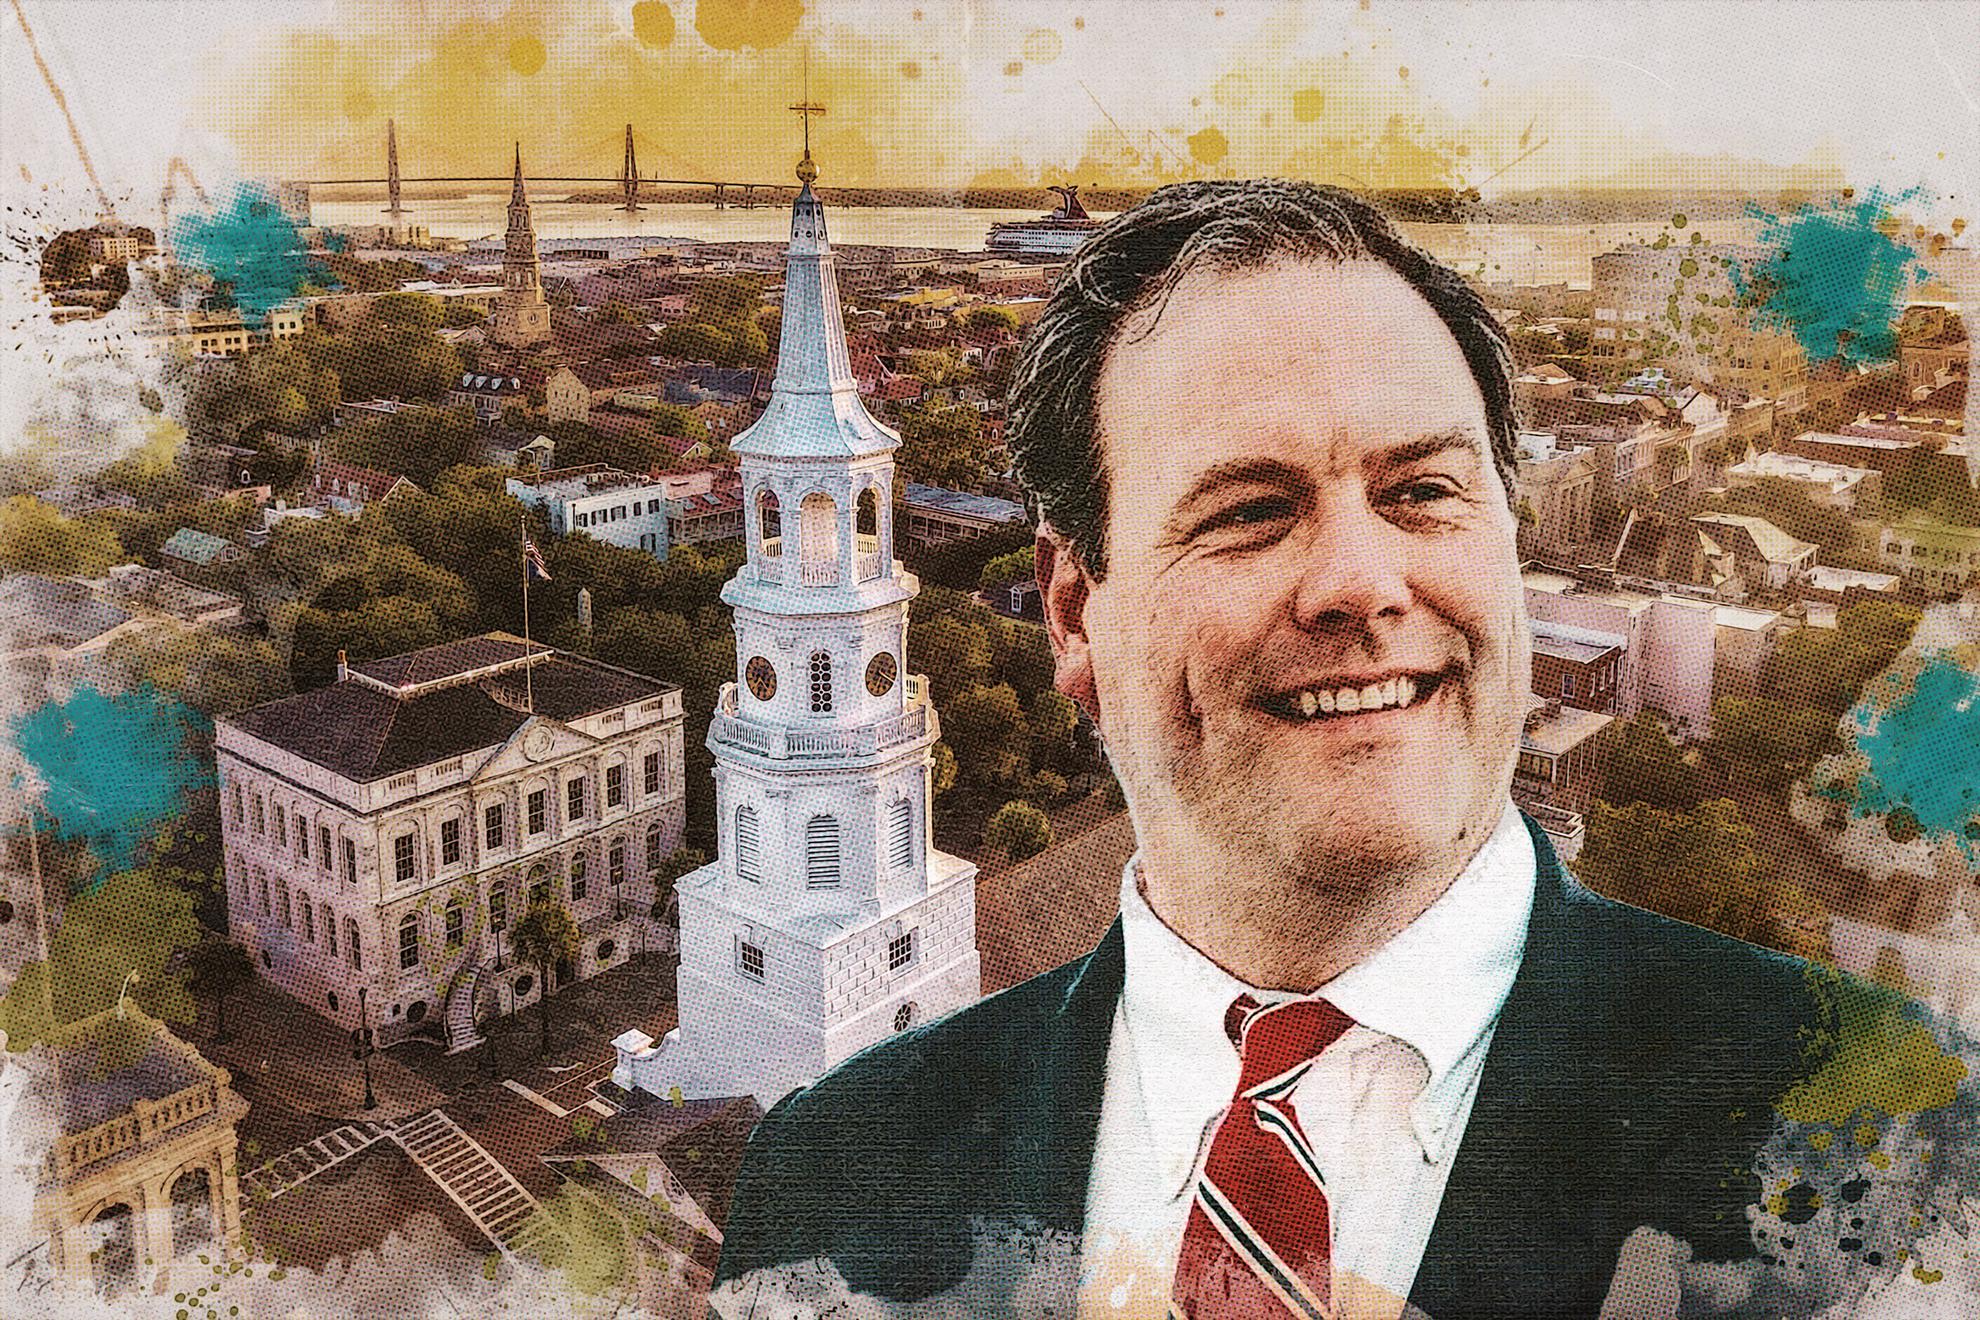 This City Elected a Republican Mayor for the 1st Time Since 1877